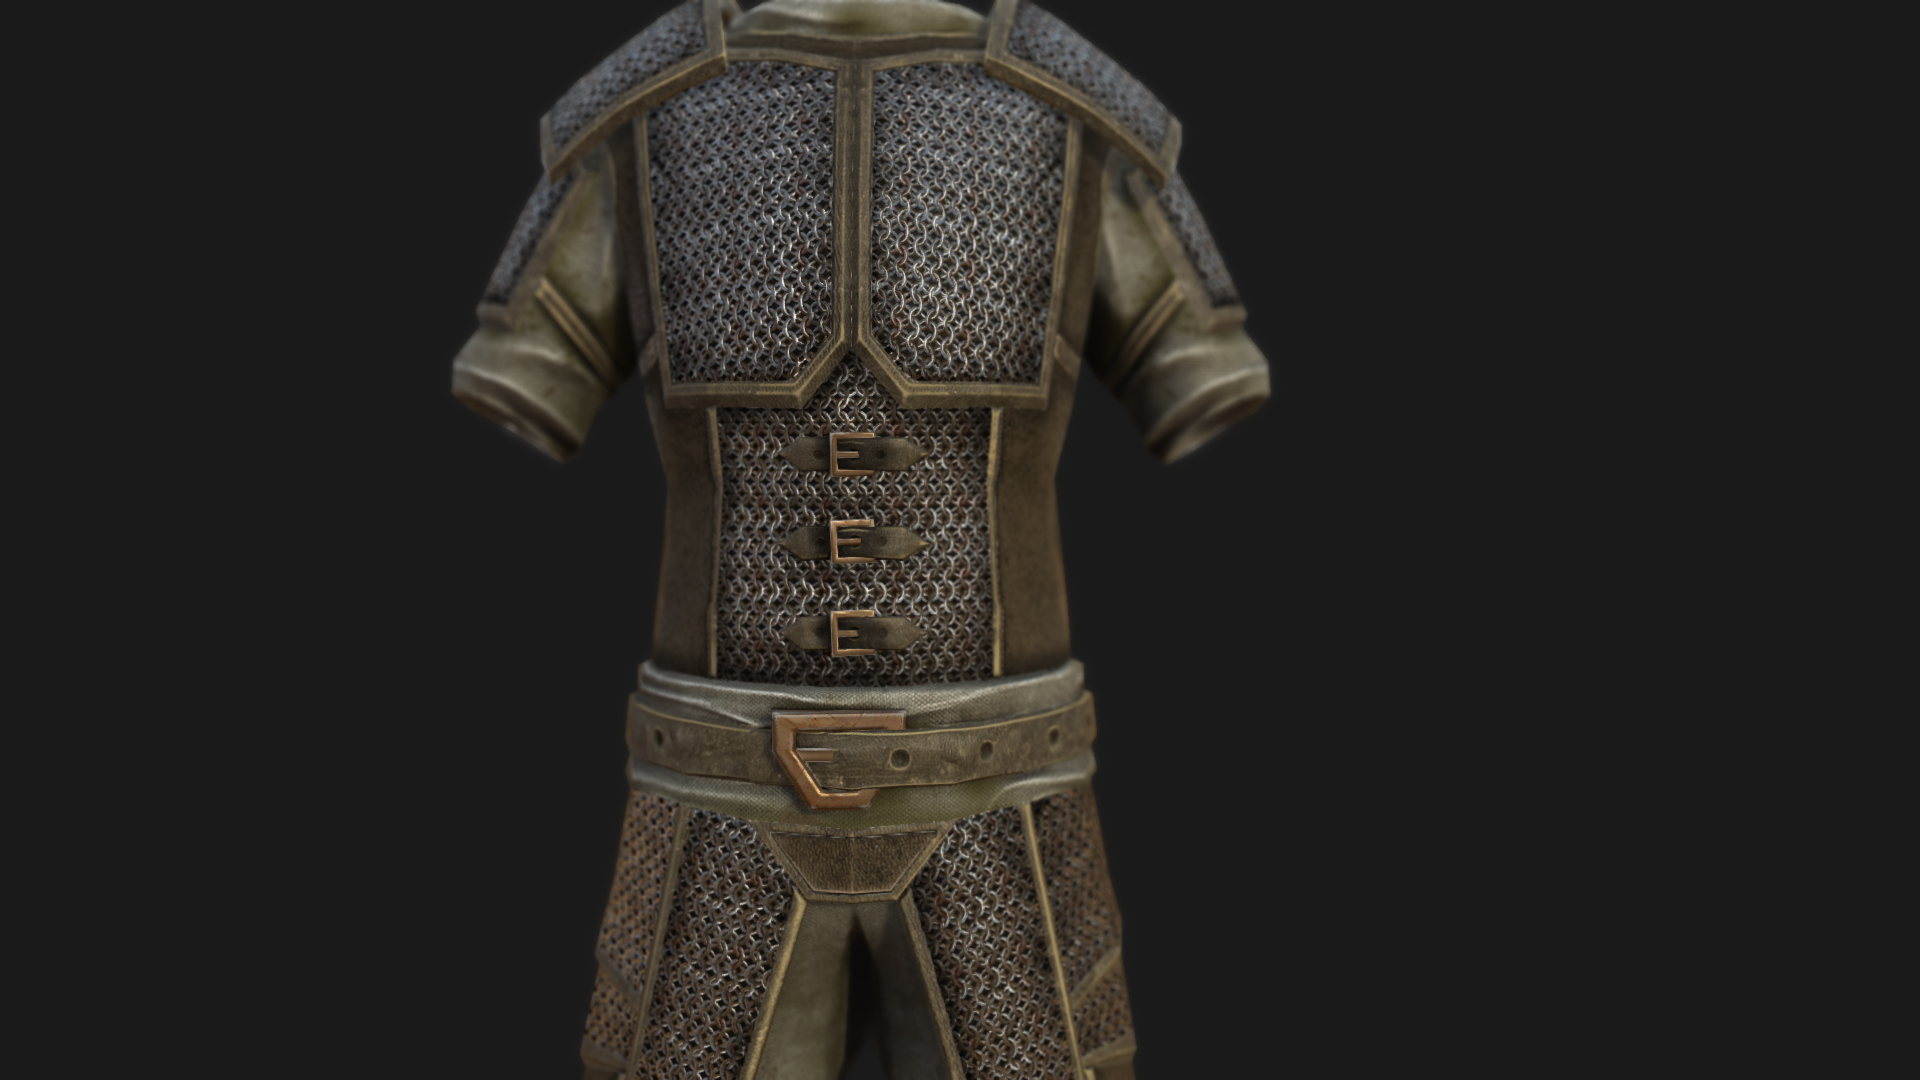 Plate-chainmail armor concept by Davethemaguss on DeviantArt